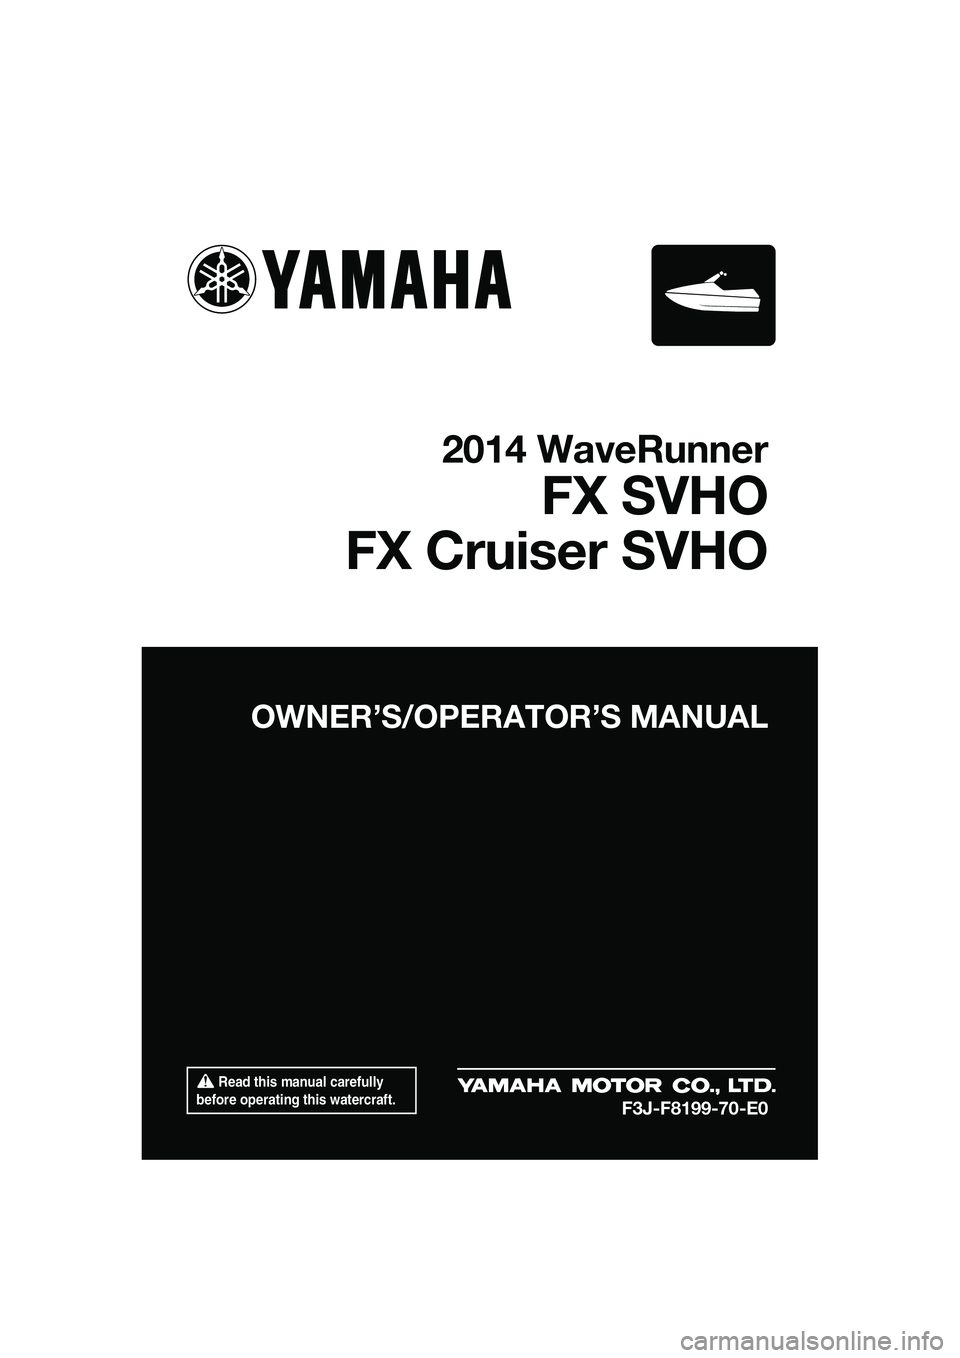 YAMAHA FX SVHO 2014  Owners Manual  Read this manual carefully 
before operating this watercraft.
OWNER’S/OPERAT OR’S MANUAL
2014 WaveRunner
FX SVHO
FX Cruiser SVHO
F3J-F8199-70-E0
UF3J70E0.book  Page 1  Wednesd ay, October 9, 2013